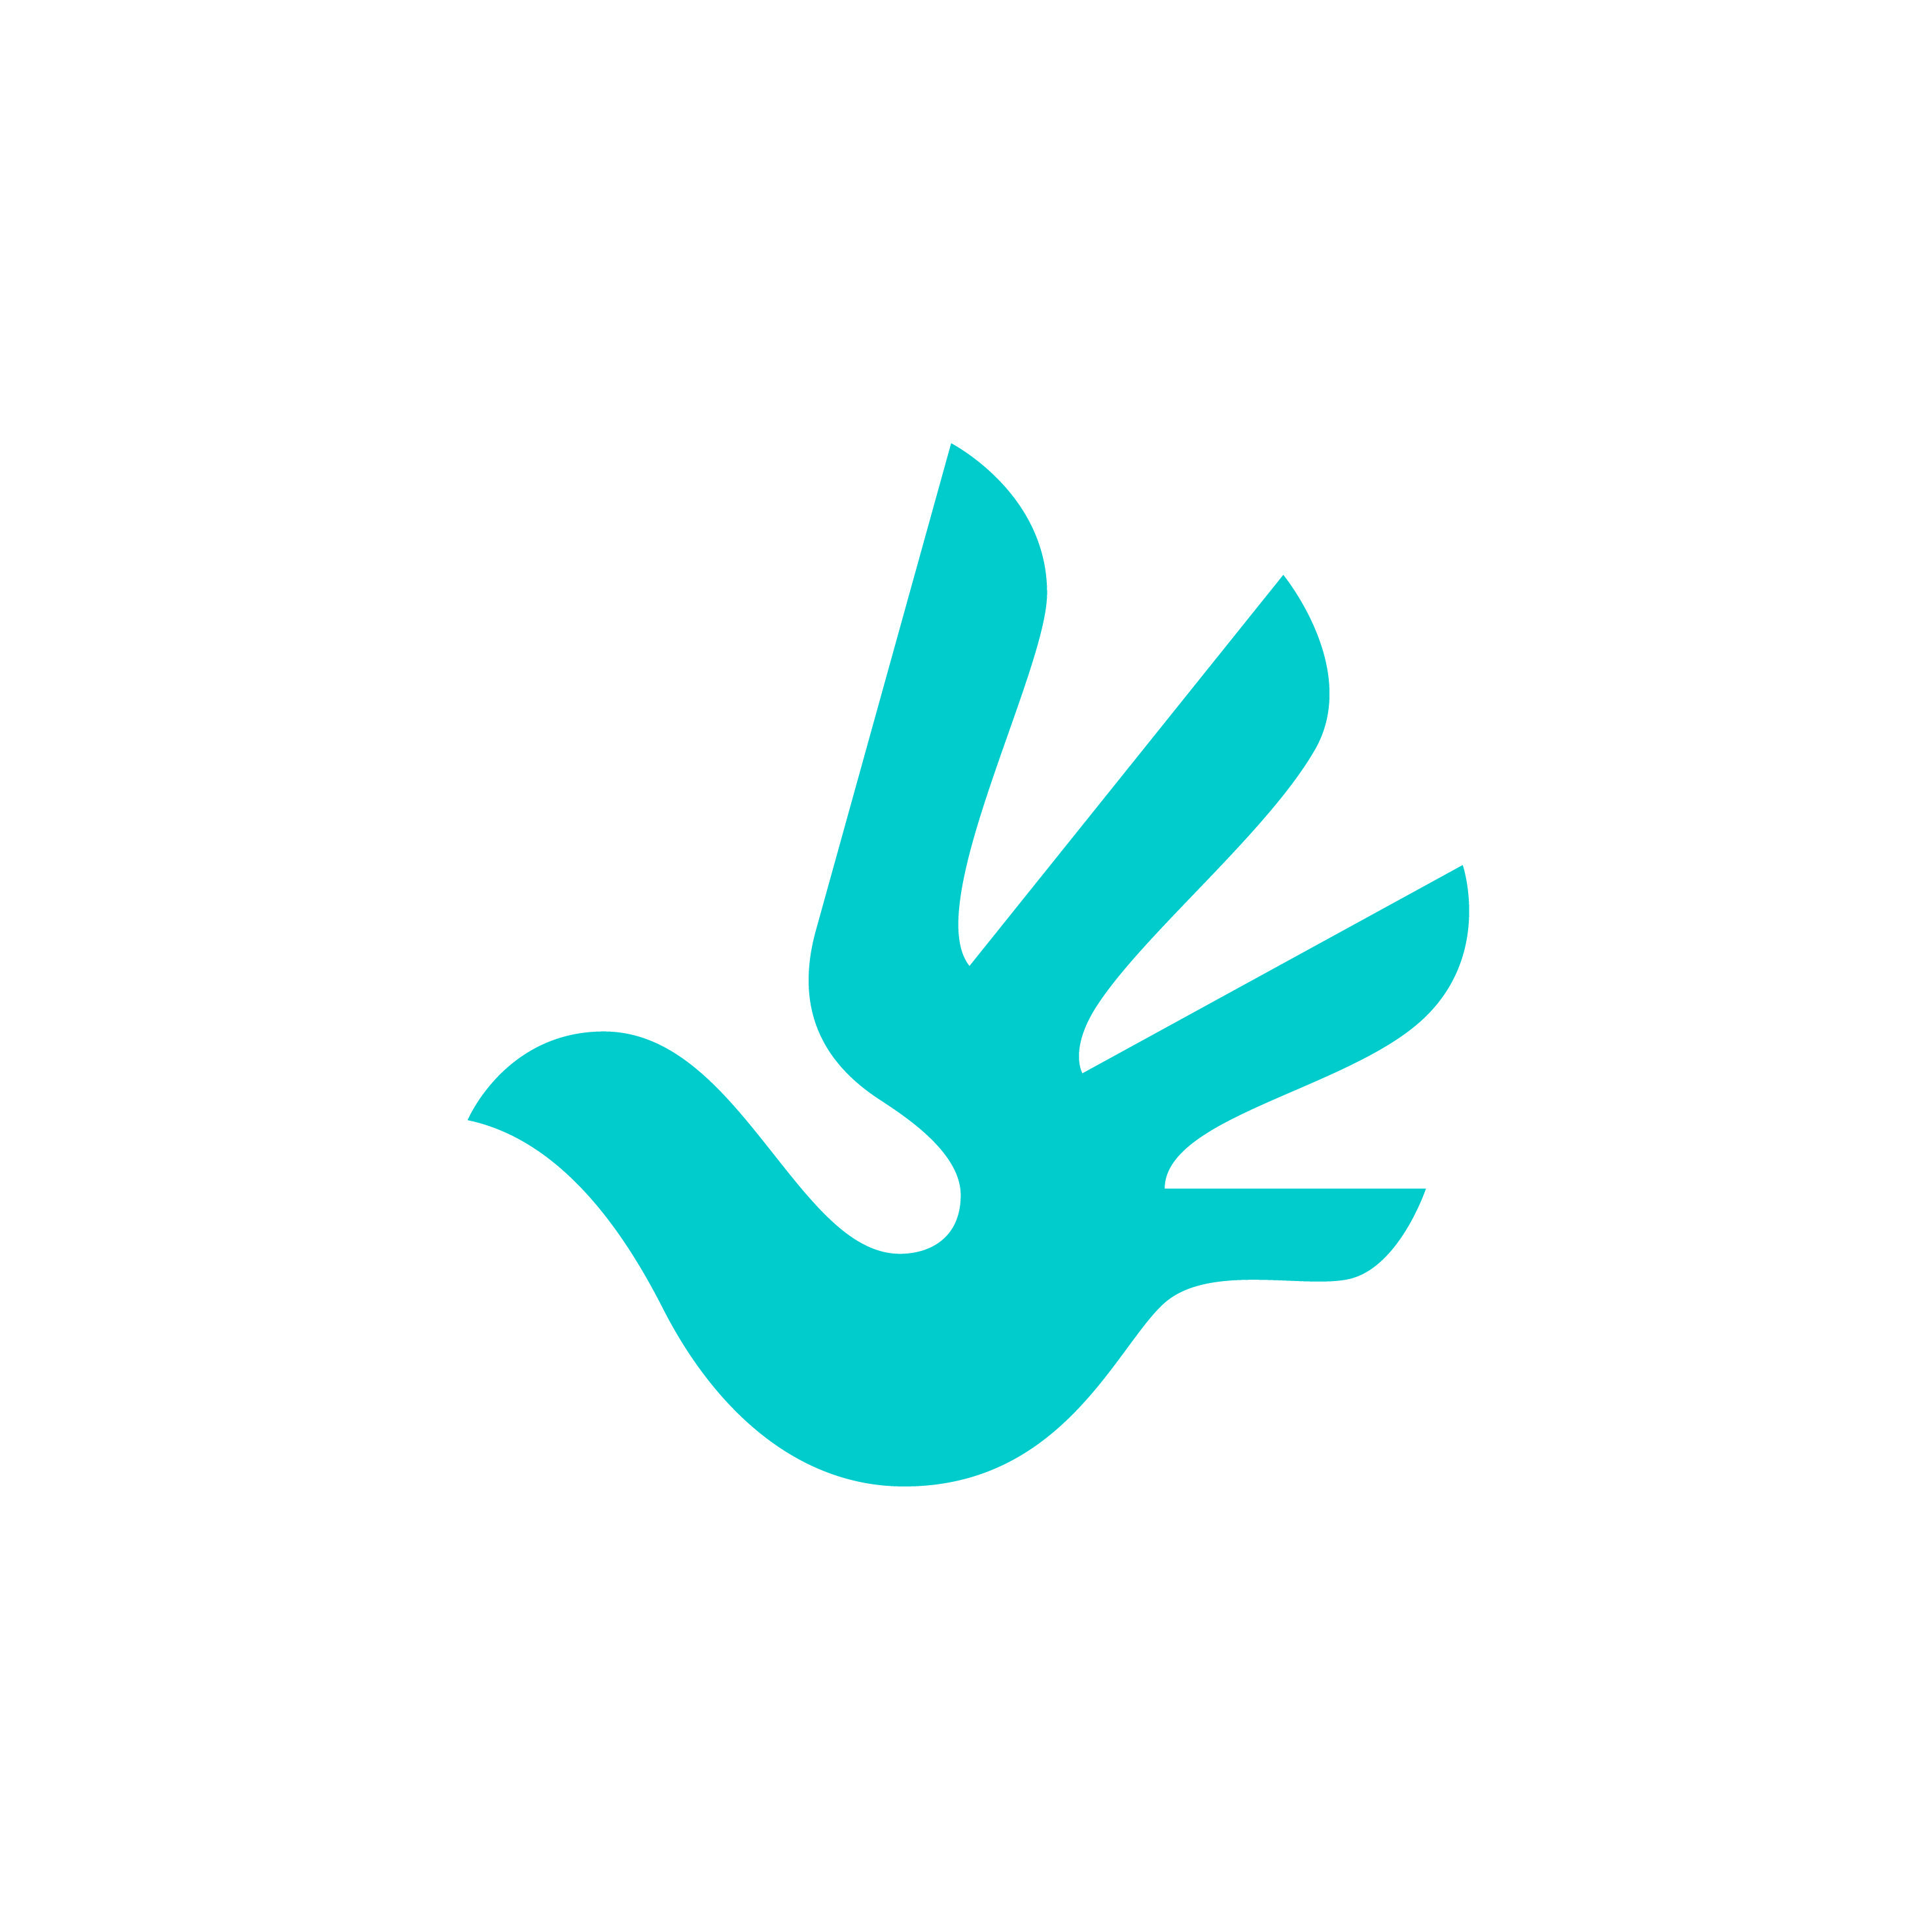 Teal and Blue Logo - Downloads | The Universal Logo For Human Rights